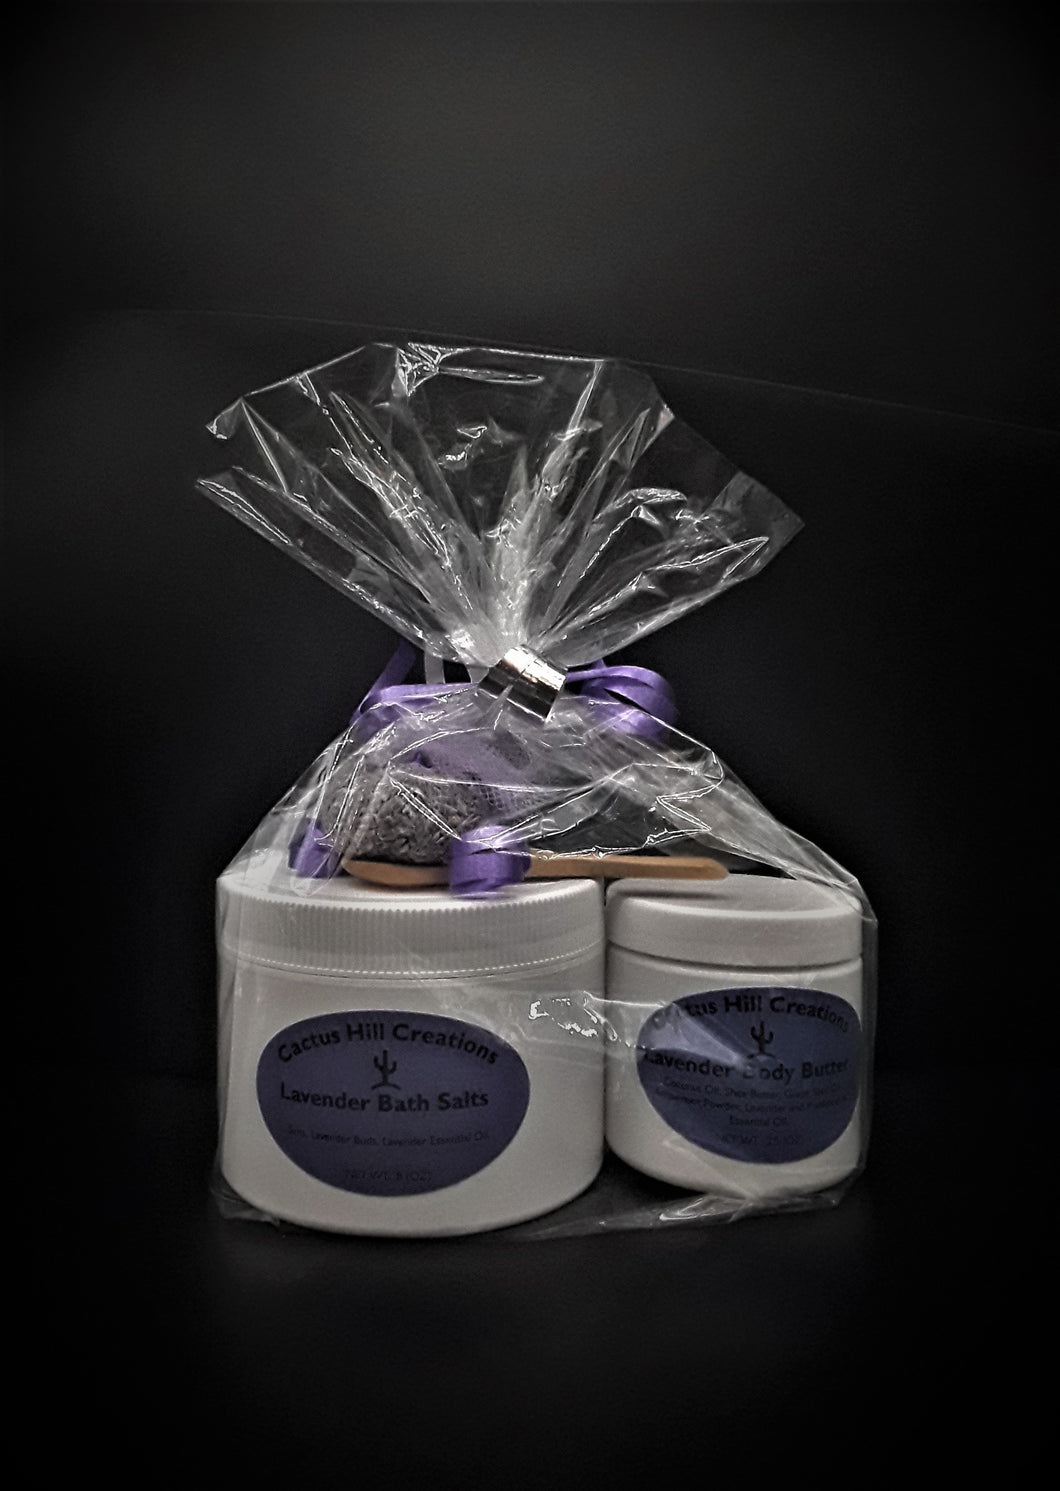 Lavender Bath Salts and Body Butter Gift Bag